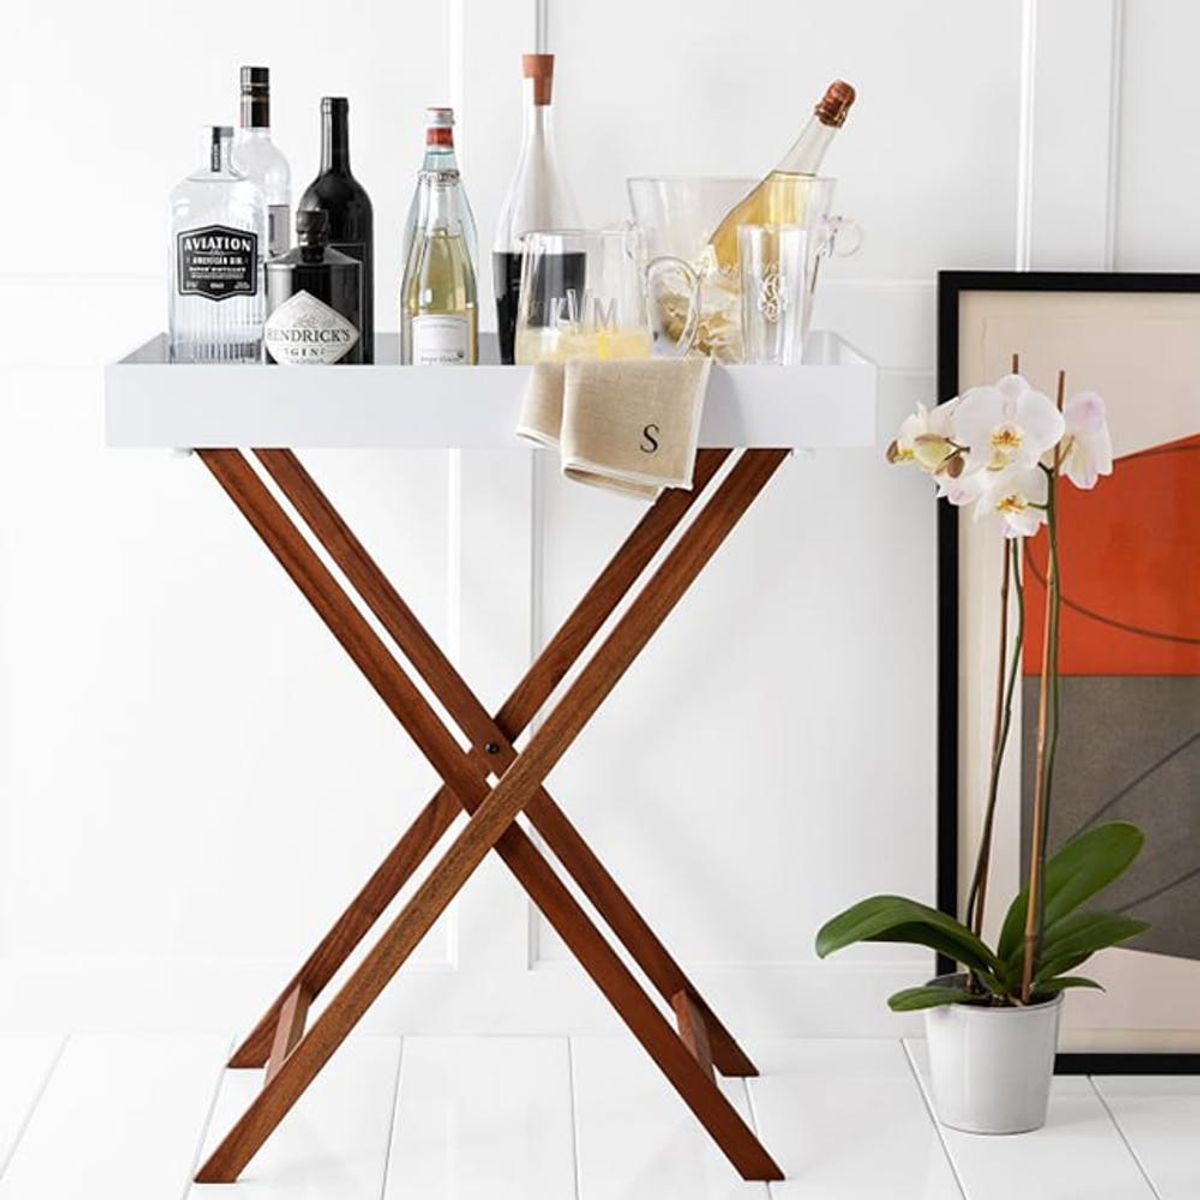 15 Furniture Pieces You Should Definitely Buy (but Haven’t Thought to) for Your Home